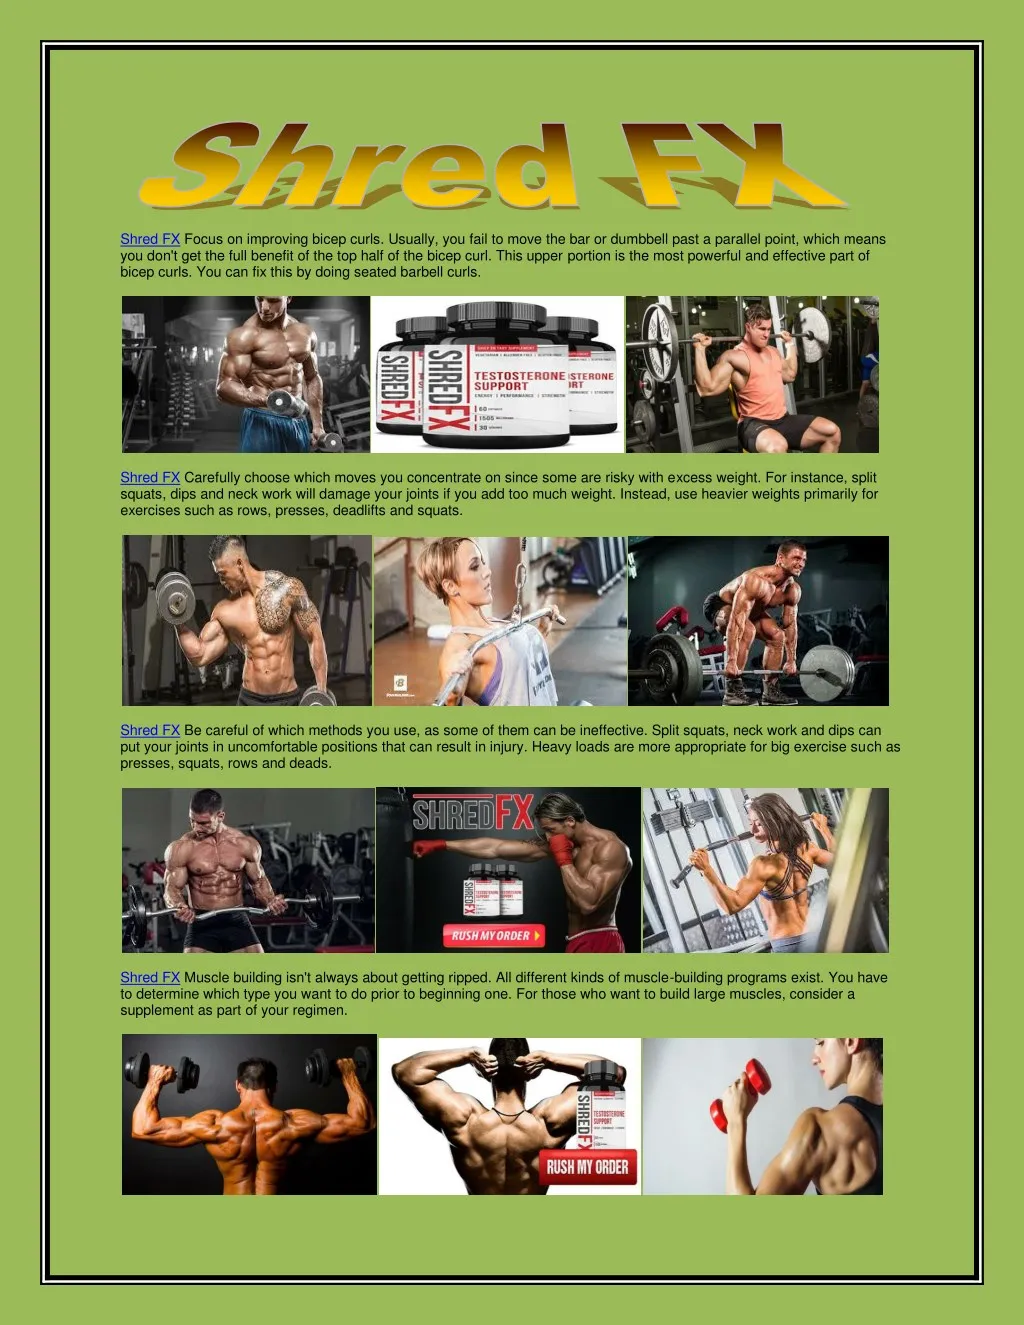 shred fx focus on improving bicep curls usually